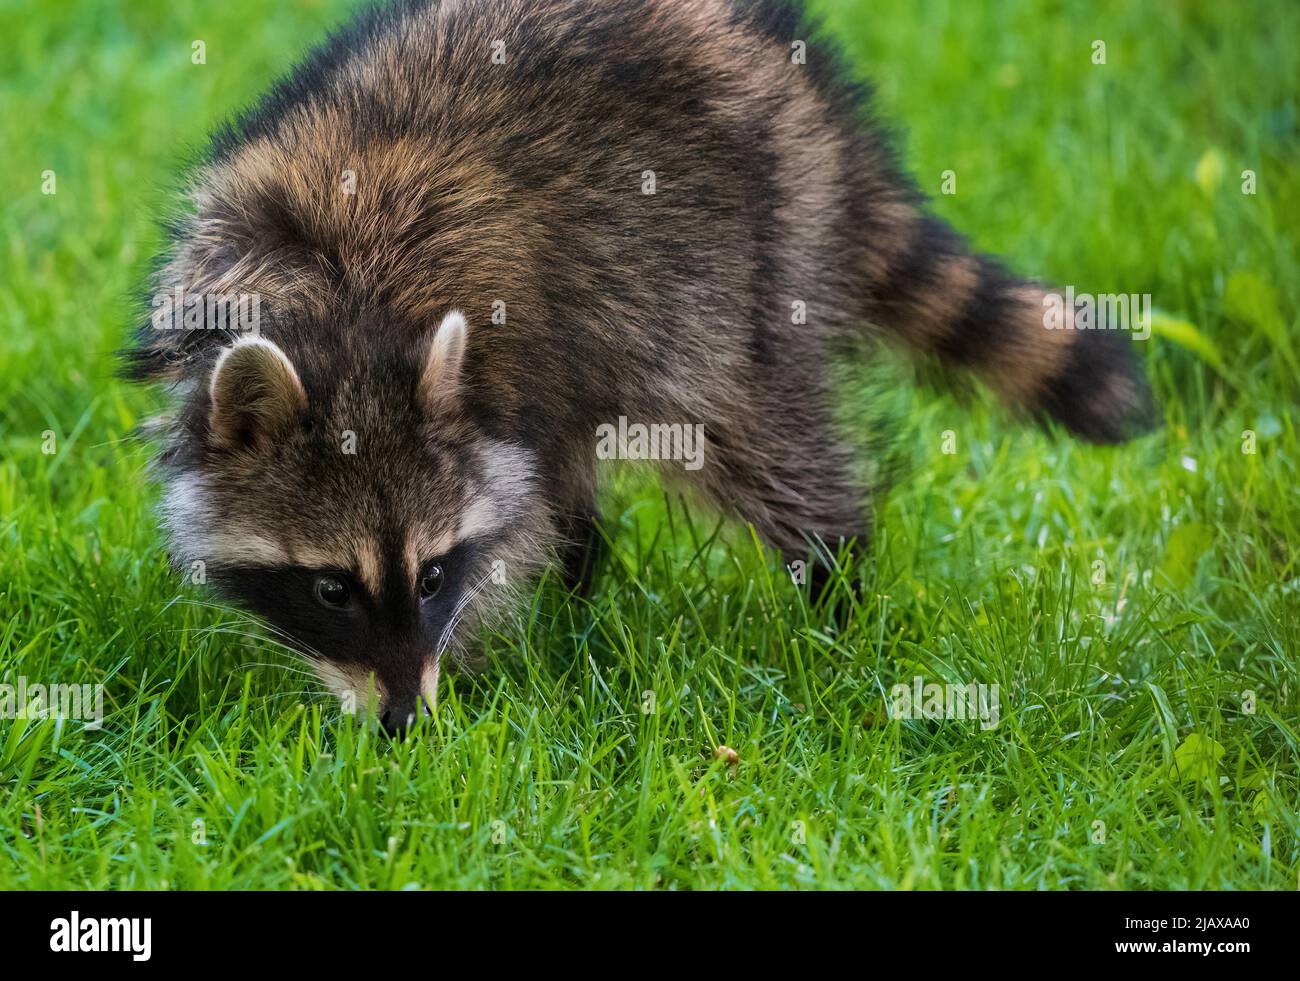 A wild Masked Bandit Raccoon sniffs the ground as it crosses a grassy green lawn in the daytime. Stock Photo